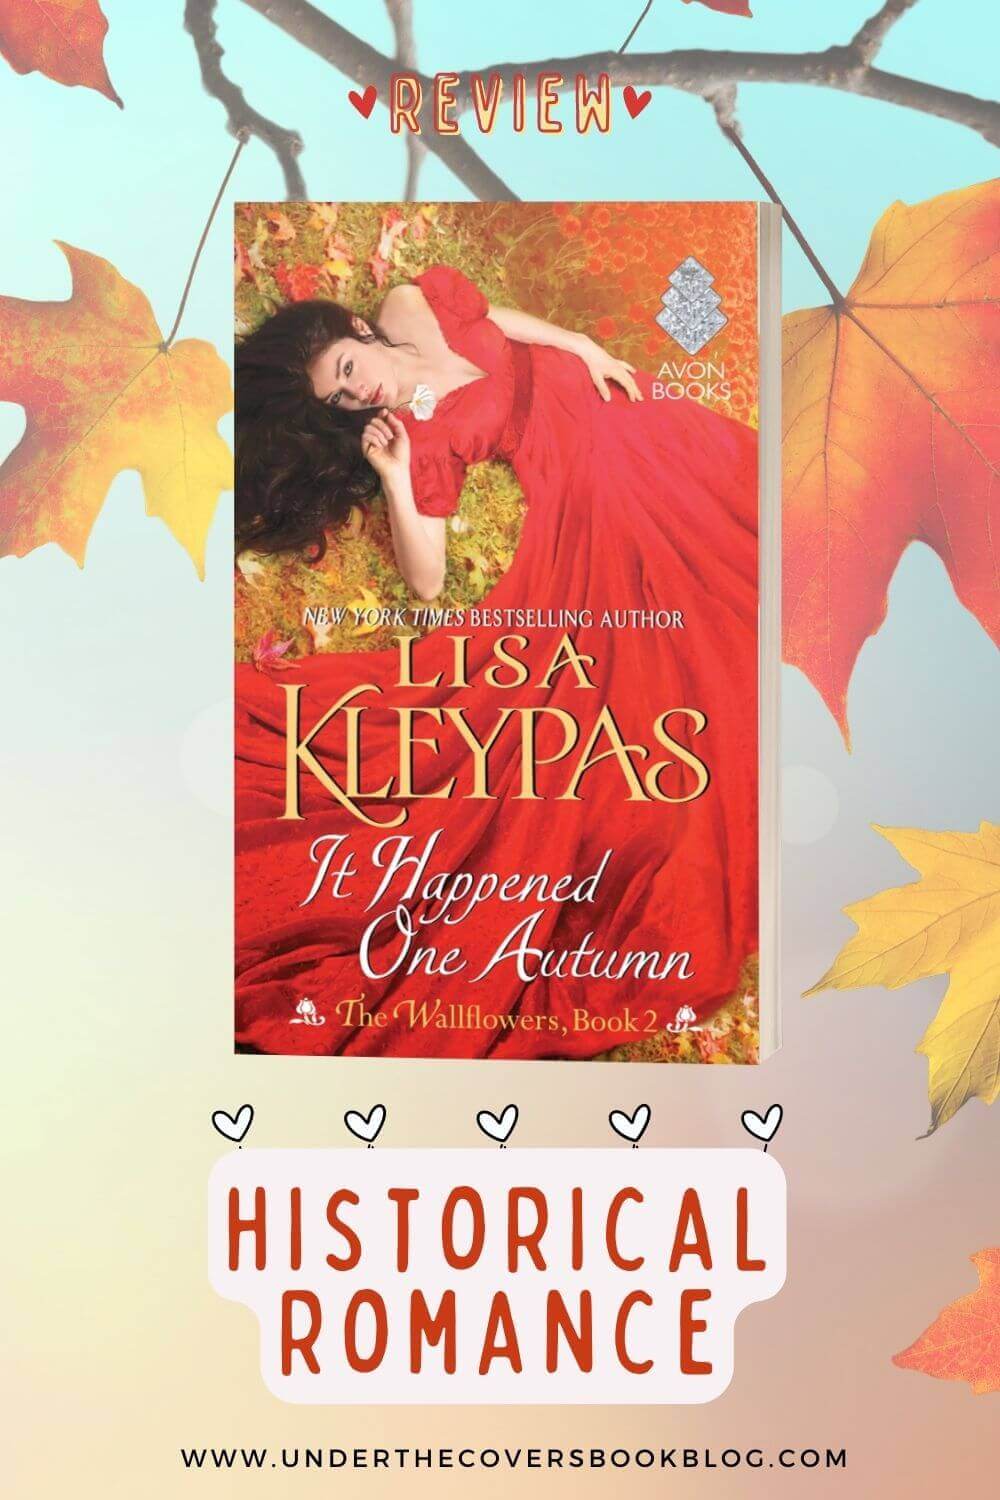 Historical Romance Review: It Happened One Autumn by Lisa Kleypas